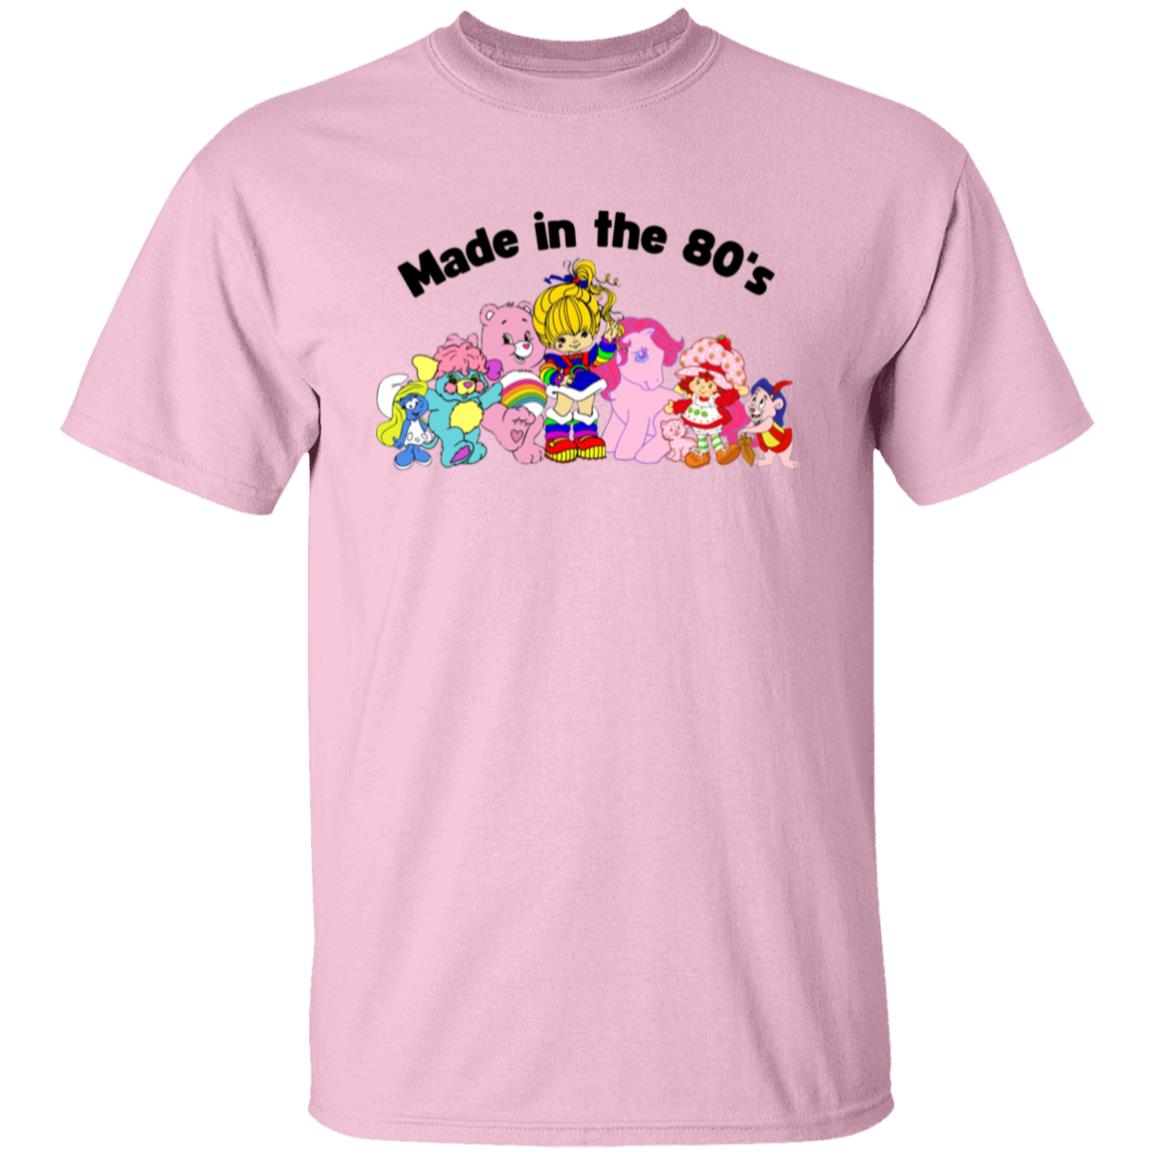 Made in the 80s 5.3 oz. T-Shirt